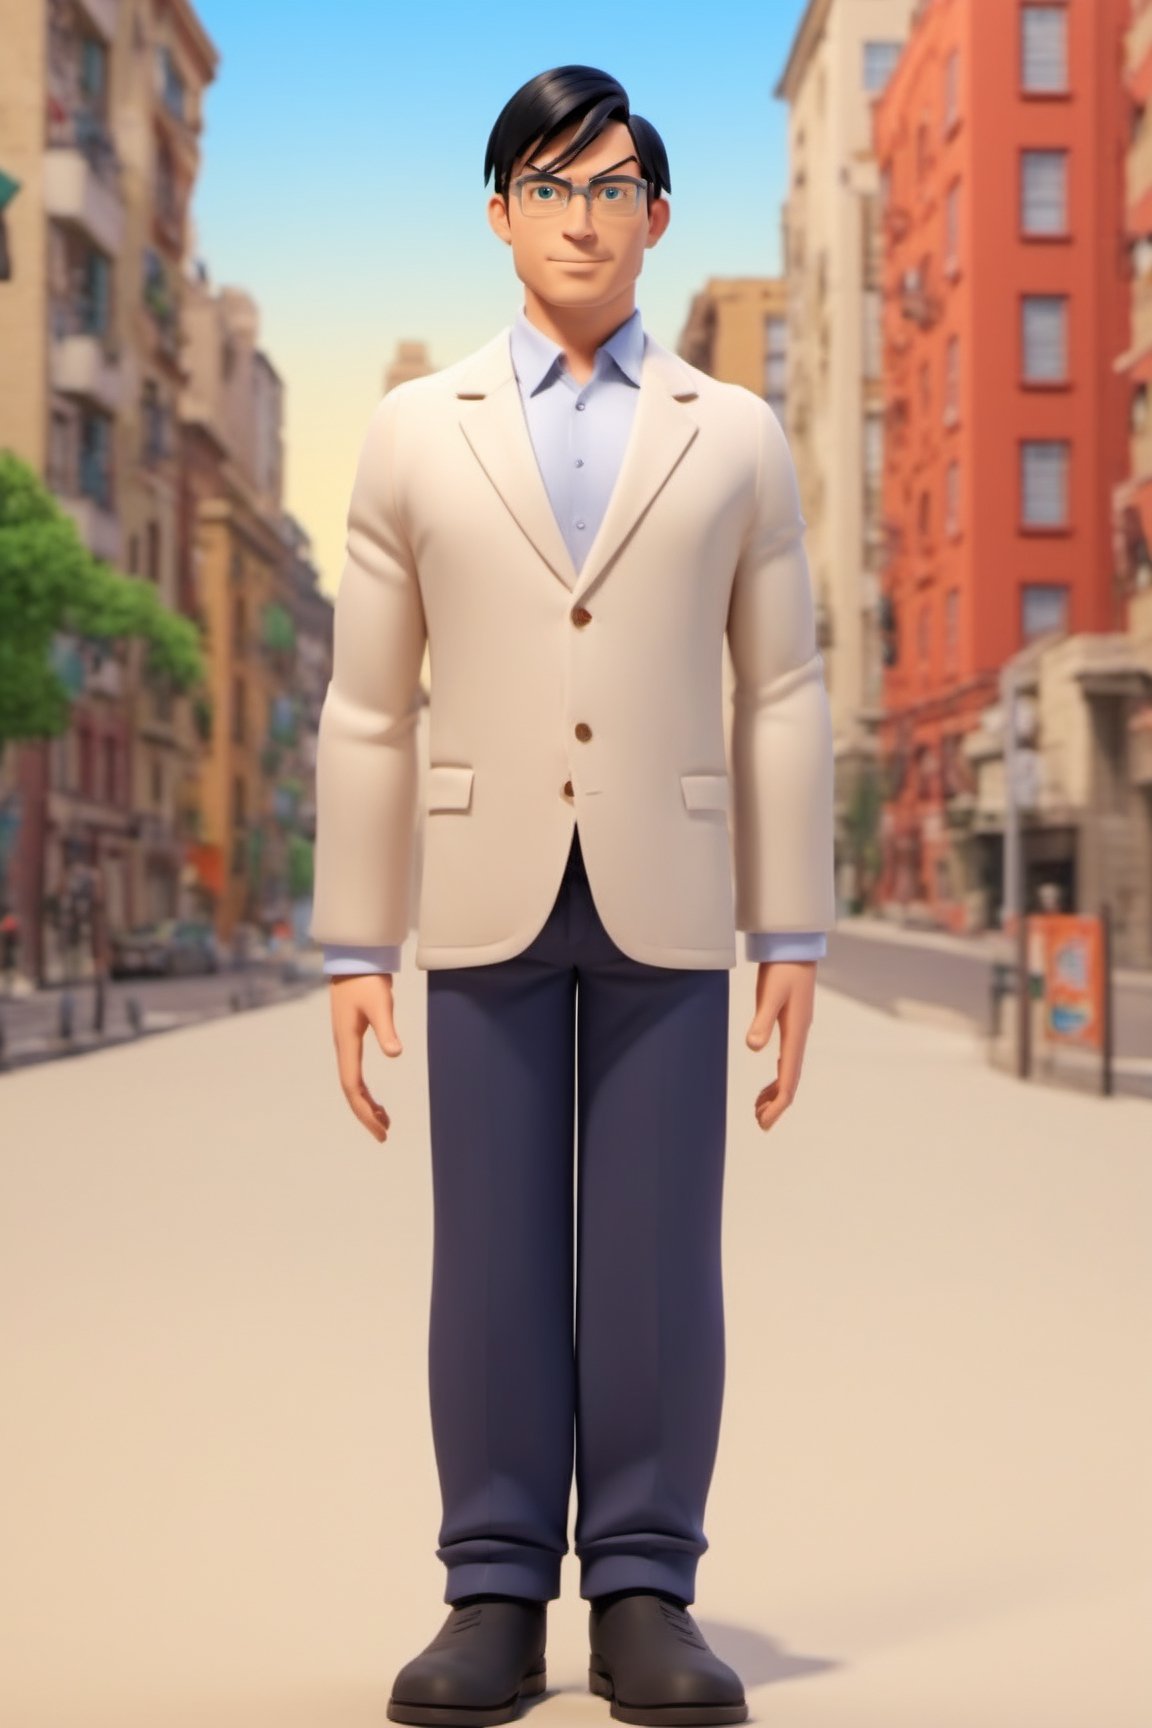 3d toon style image of full body tenxiida character, serious male, black hair, wearing glasses, in casual clothing, background of city buildings, 3d toon style